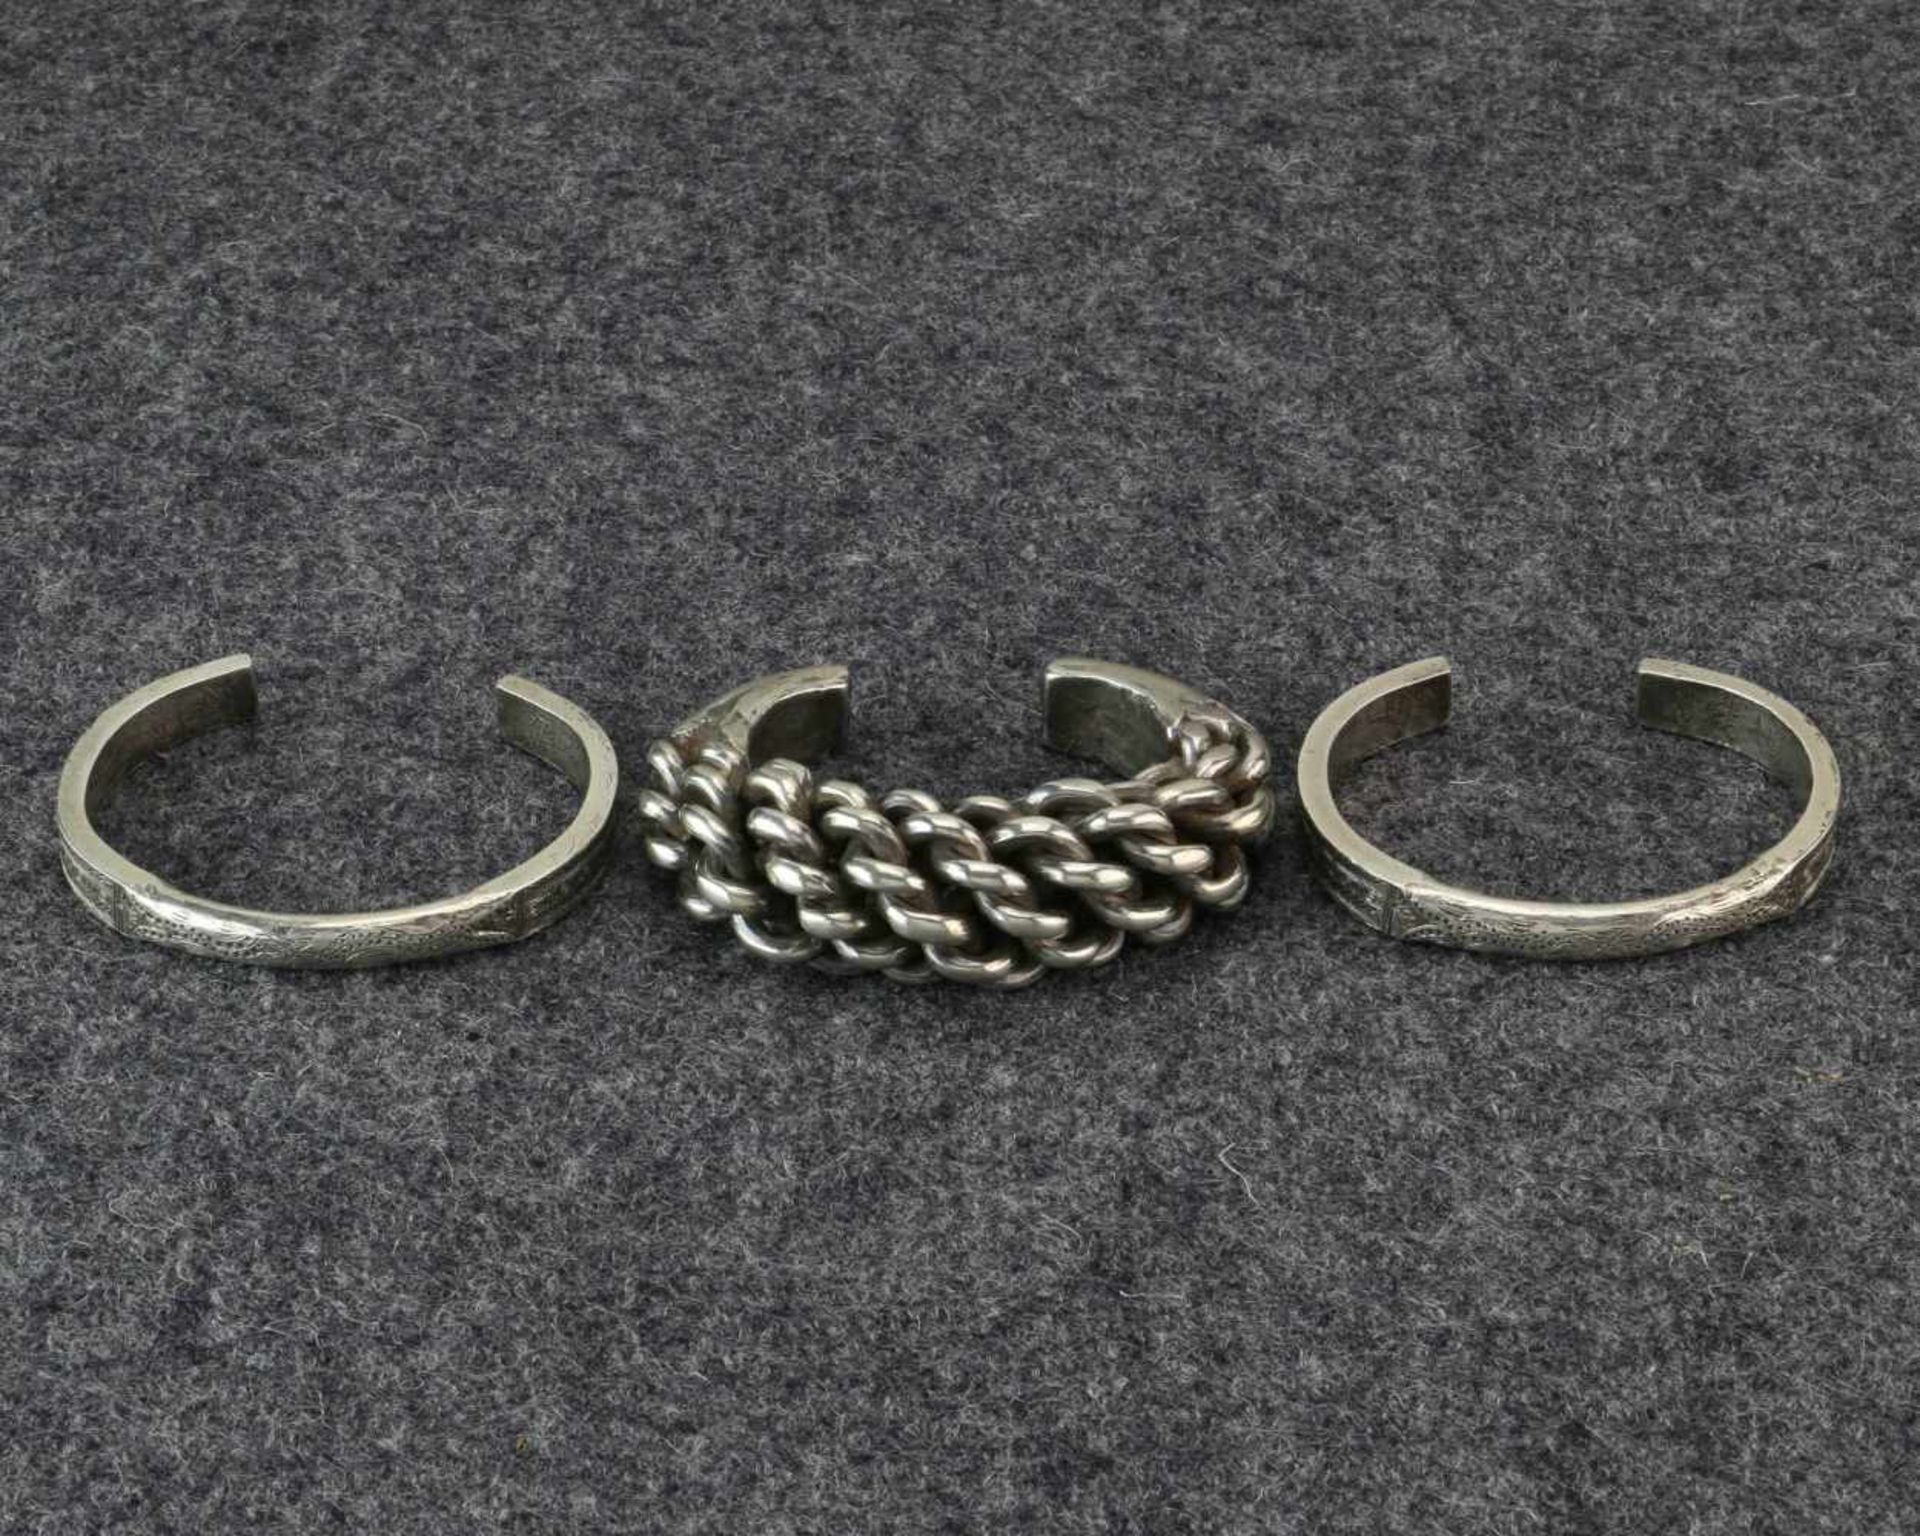 Golden Triangle, silver bracelet and a pair of solid bracelets;the twisted bracelet is worn in